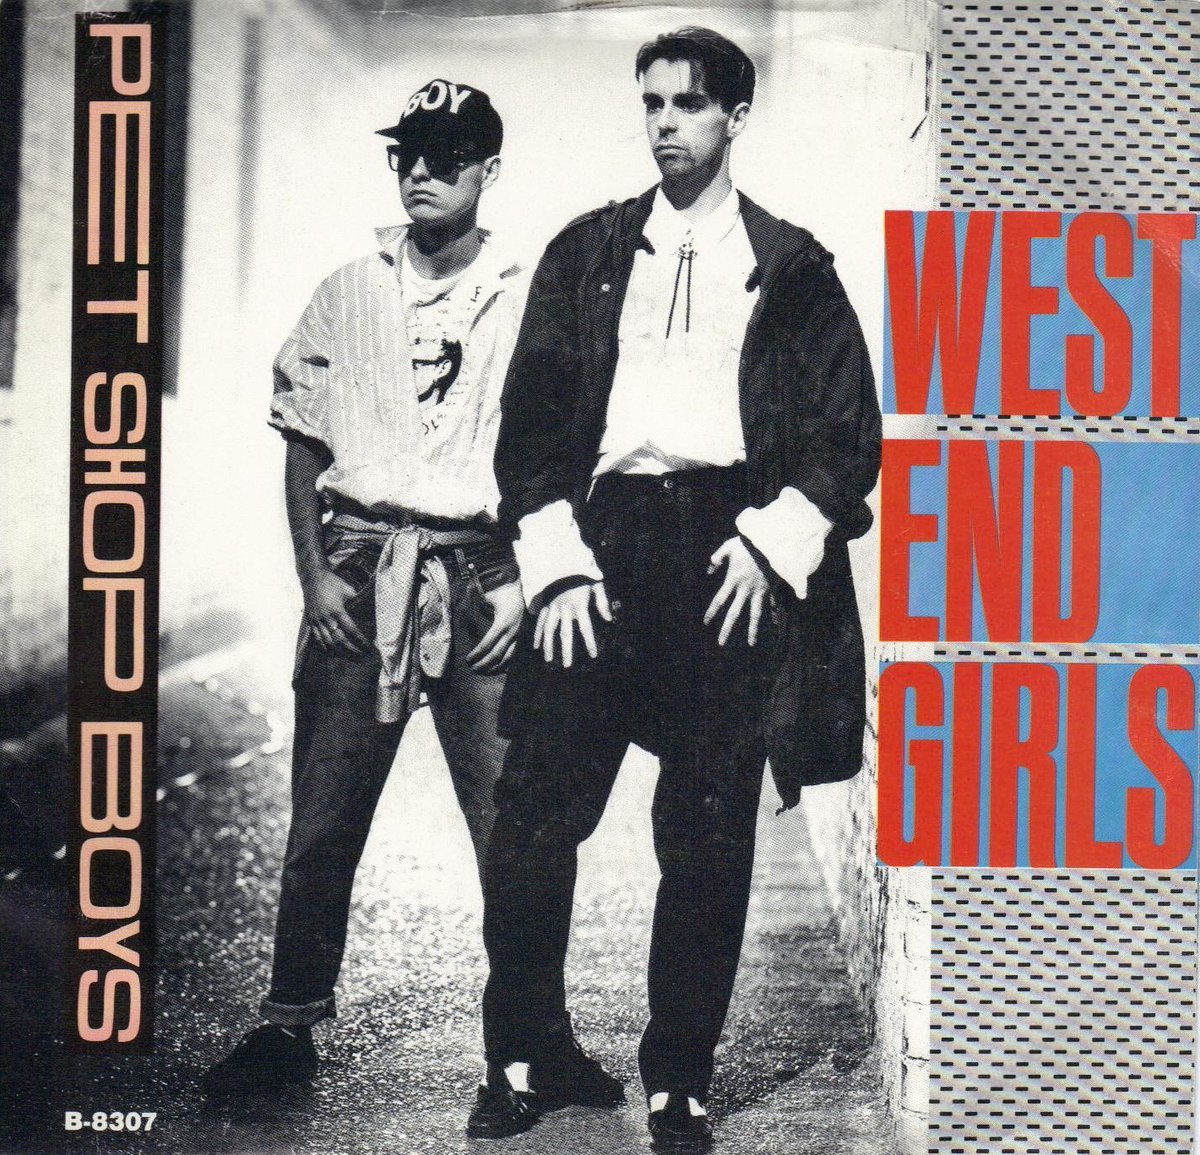 Russian history, hip hop, the underbelly of Soho, TS Eliot & James Cagney in collision on the dance floor of the Paradise Garage to create one of 1984's perfect singles. West End Girls at 40. (I know, I bought the 7' the week it came out... 😢) thequietus.com/opinion-and-es…